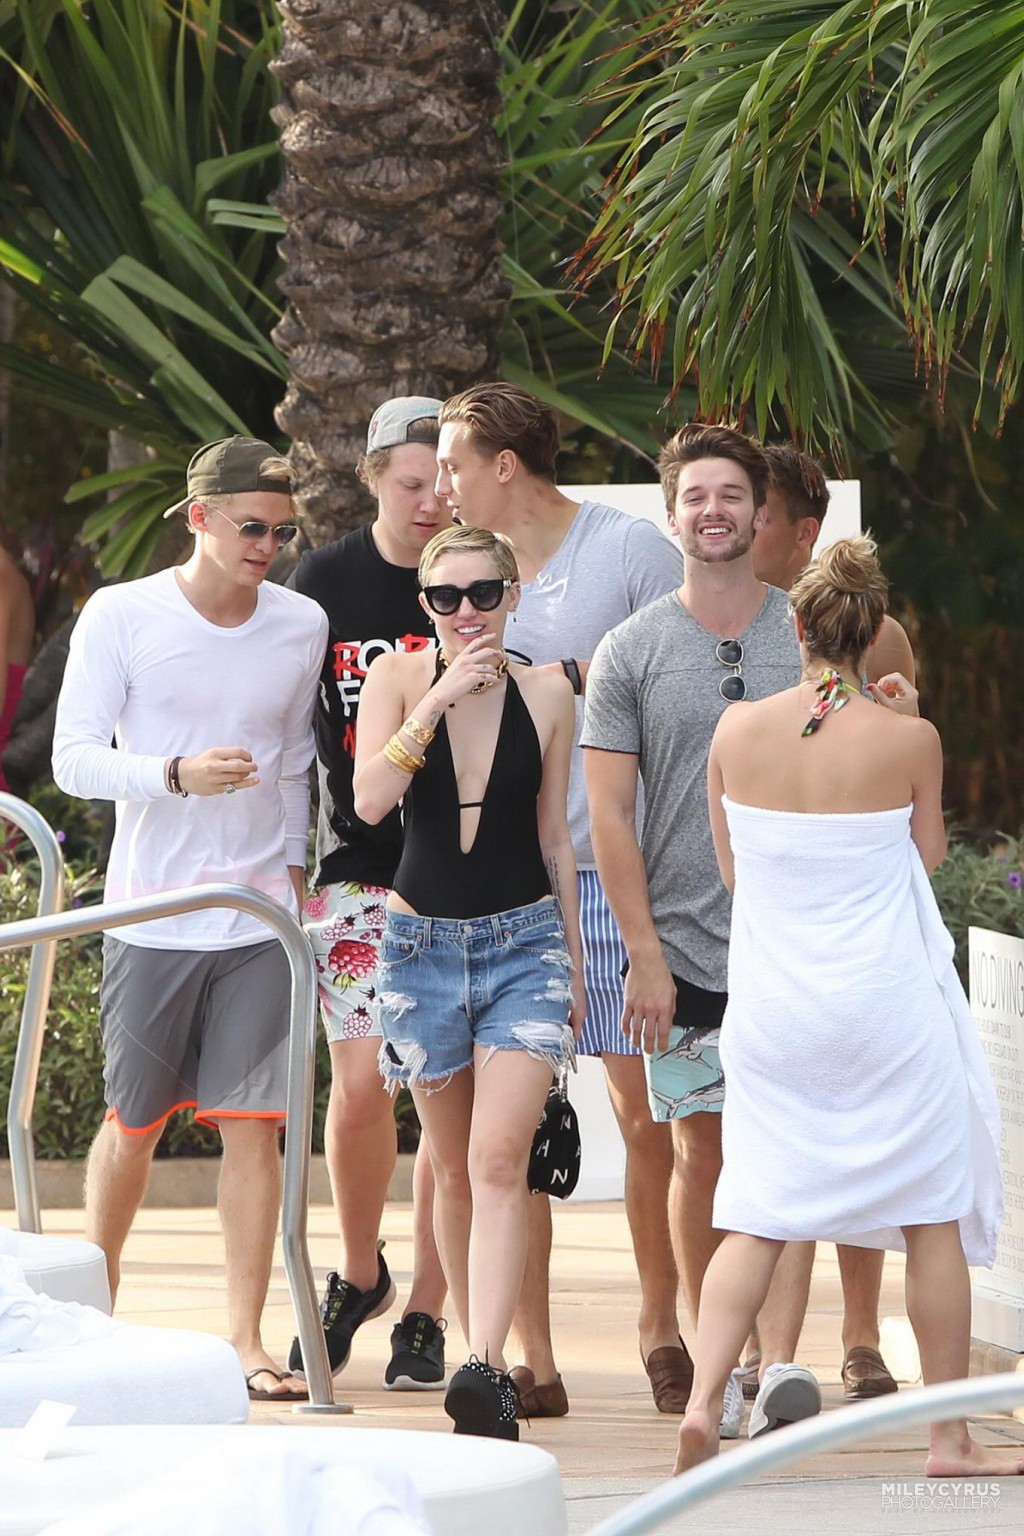 Miley Cyrus wearing swimsuit and hotpants at a pool in Miami #75178830